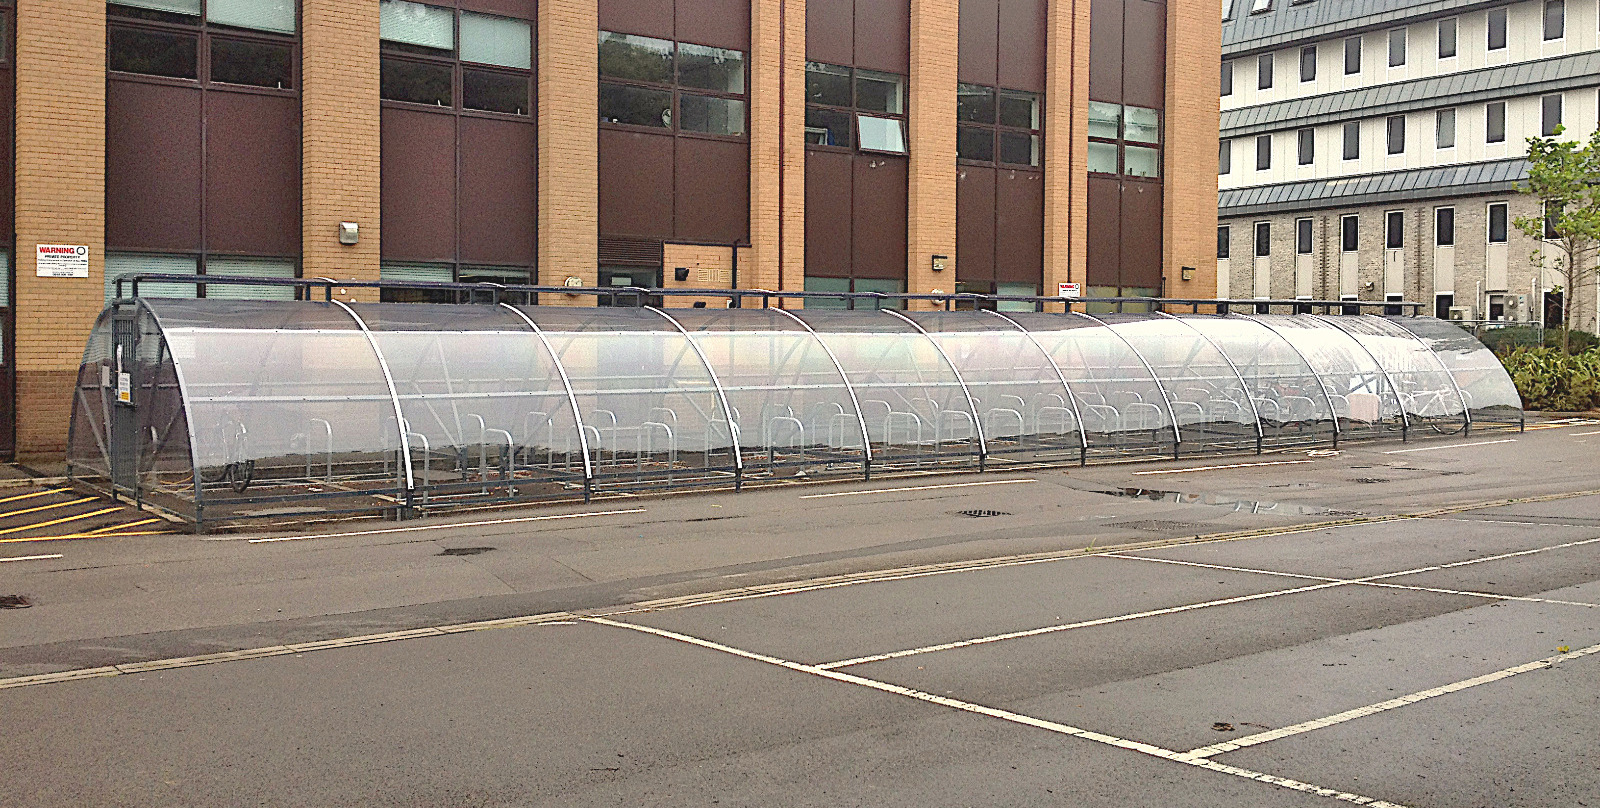 Image of the Bike Dock Solutions Thirlmere 120 space bike shelter set up at an office